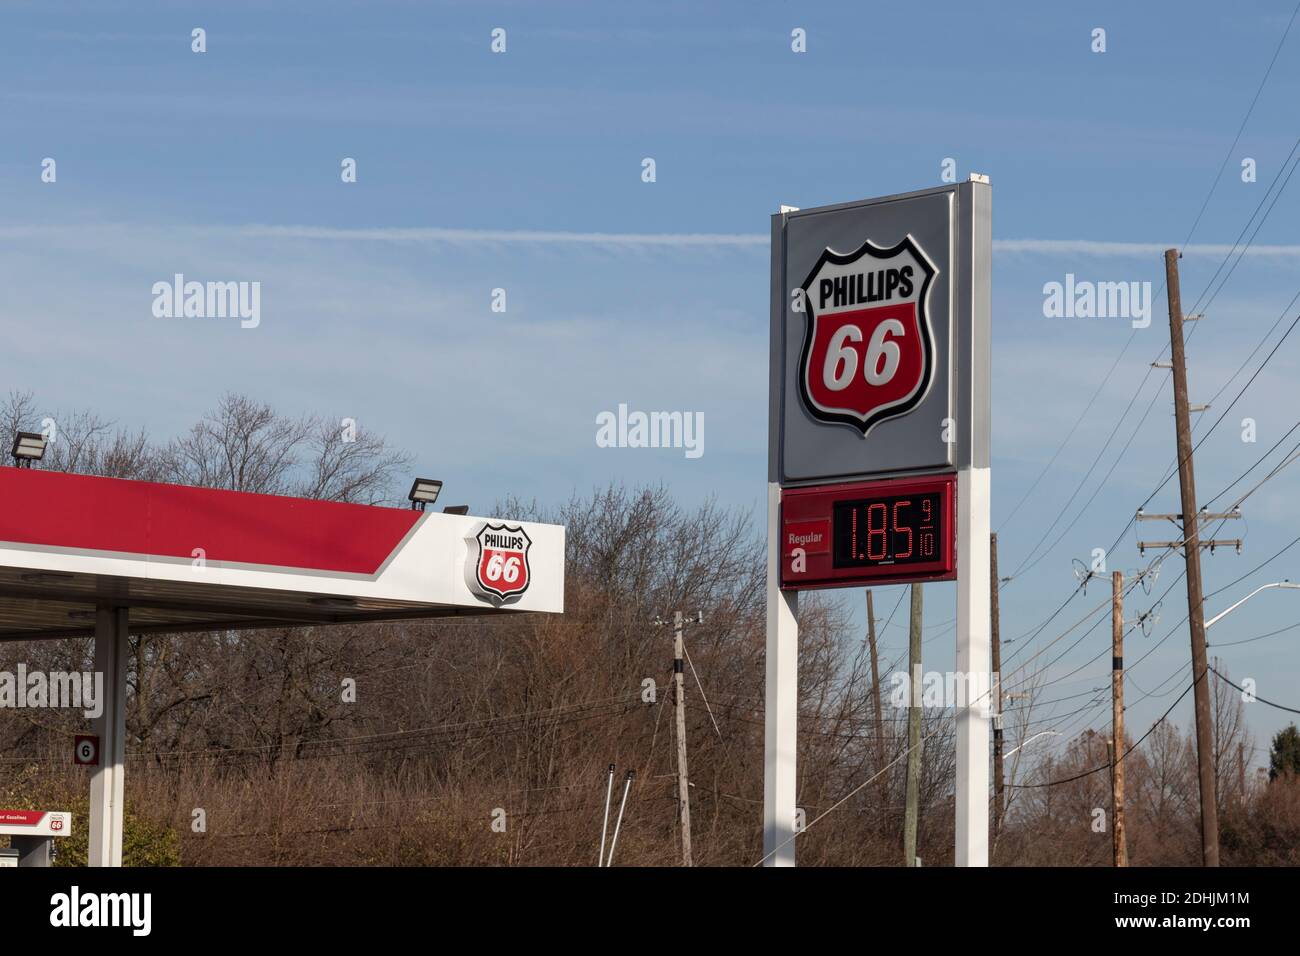 Indianapolis - Circa December 2020: Phillips 66 Company Retail Location. Phillips 66 is an American energy company and an independent oil refiner. Stock Photo